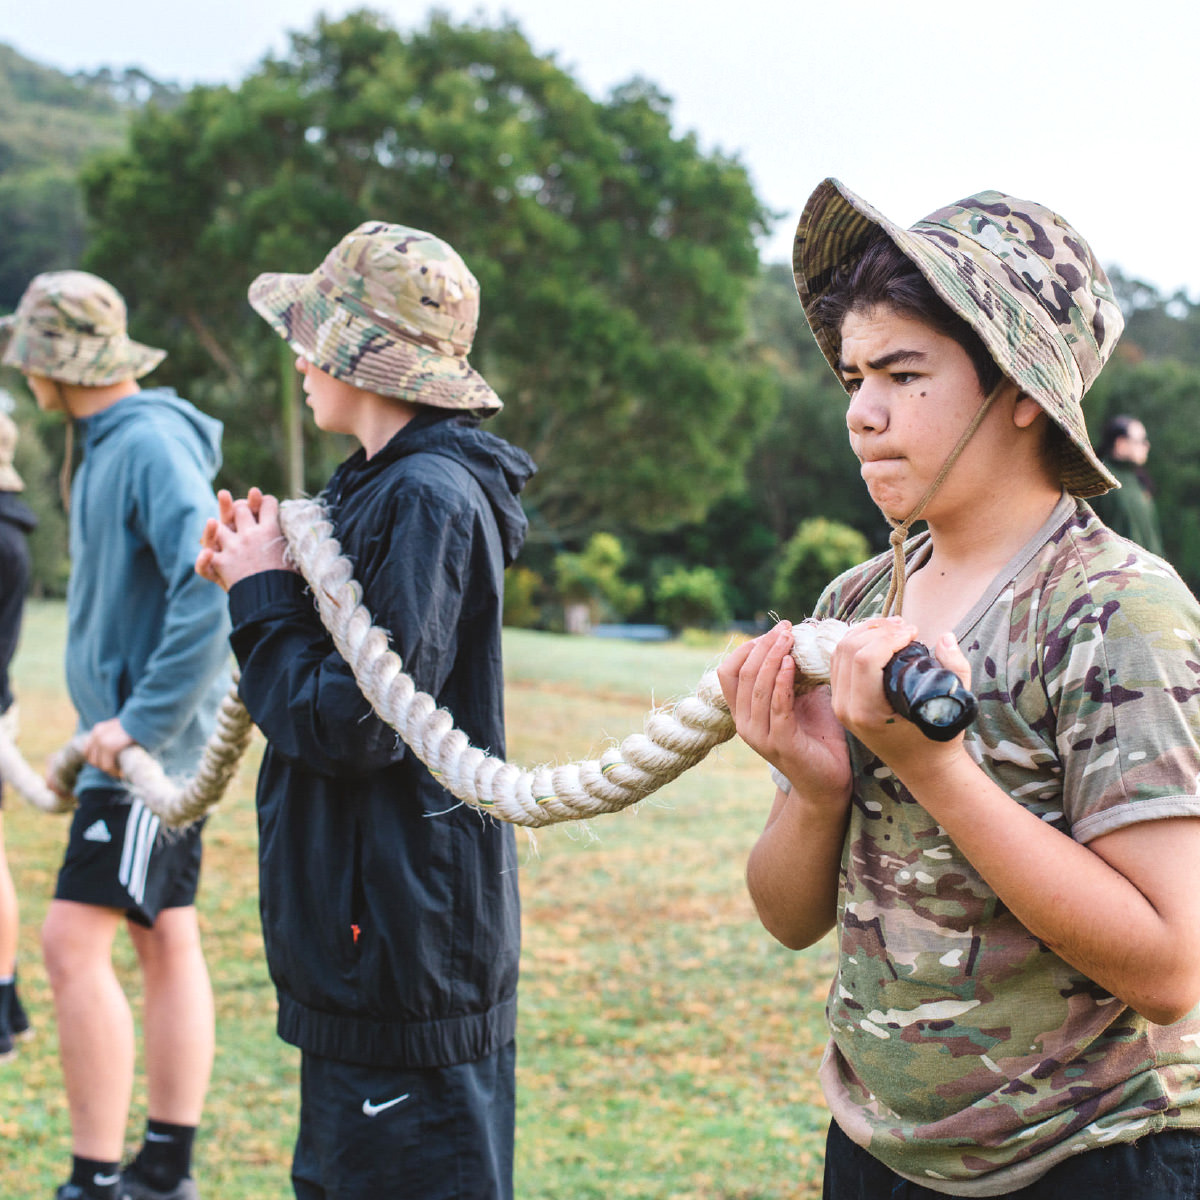 An image of boys learning teamwork and holding a rope